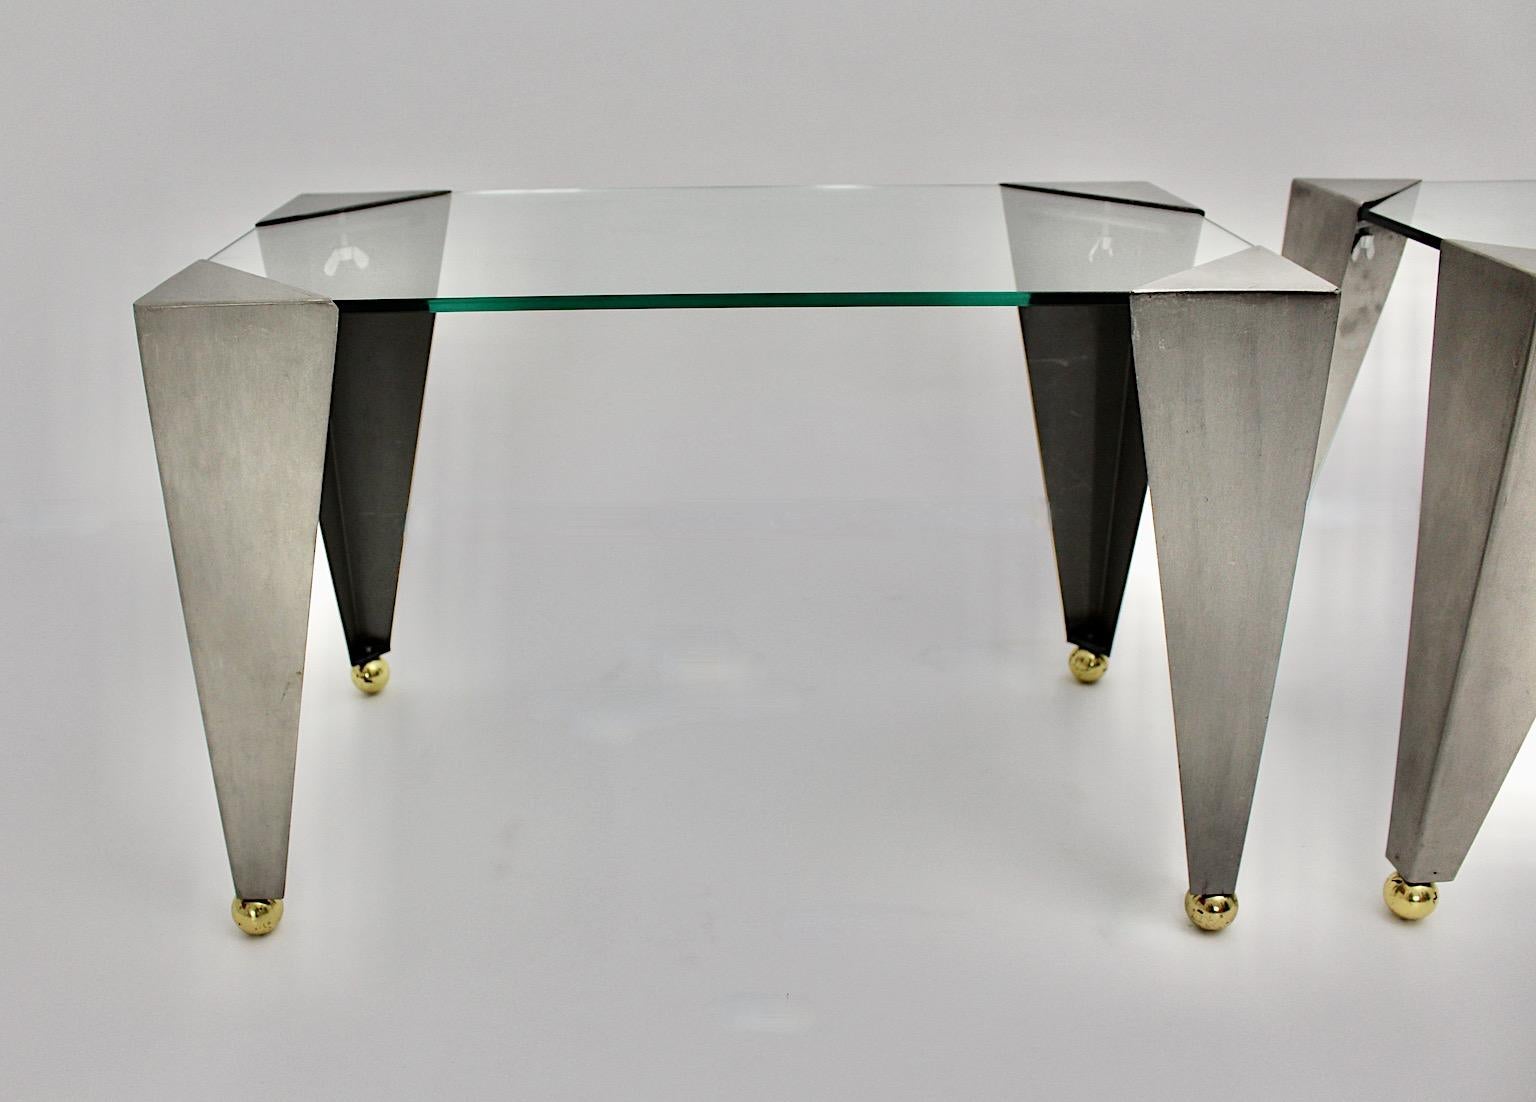 A pair of silver and gold vintage side tables or sofa tables made of stainless steel and brass which were designed and made out in the year 2000, Italy.
While the conical feet are composed of stainless steel and adjustable brass balls on their end,